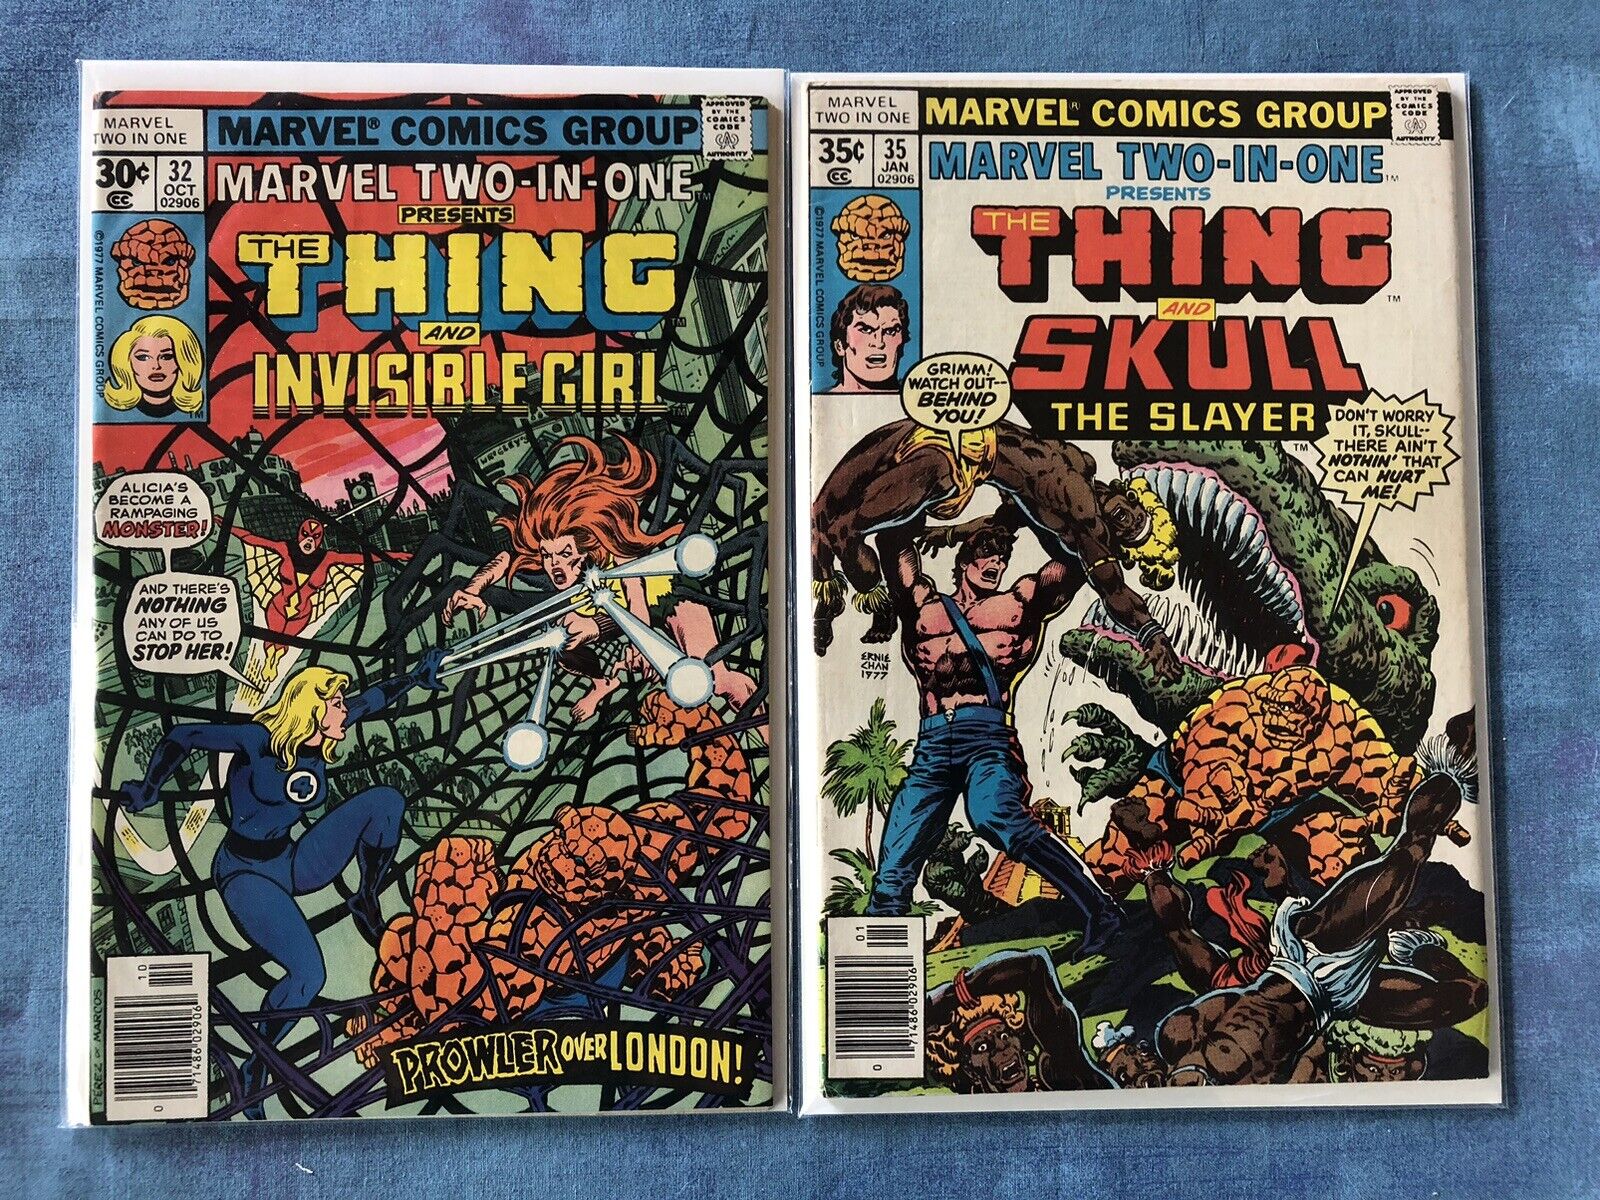 MARVEL TWO-IN-ONE COMICS # 32, #35 -BRONZE AGE, THE THING, INVISIBLE GIRL, SKULL